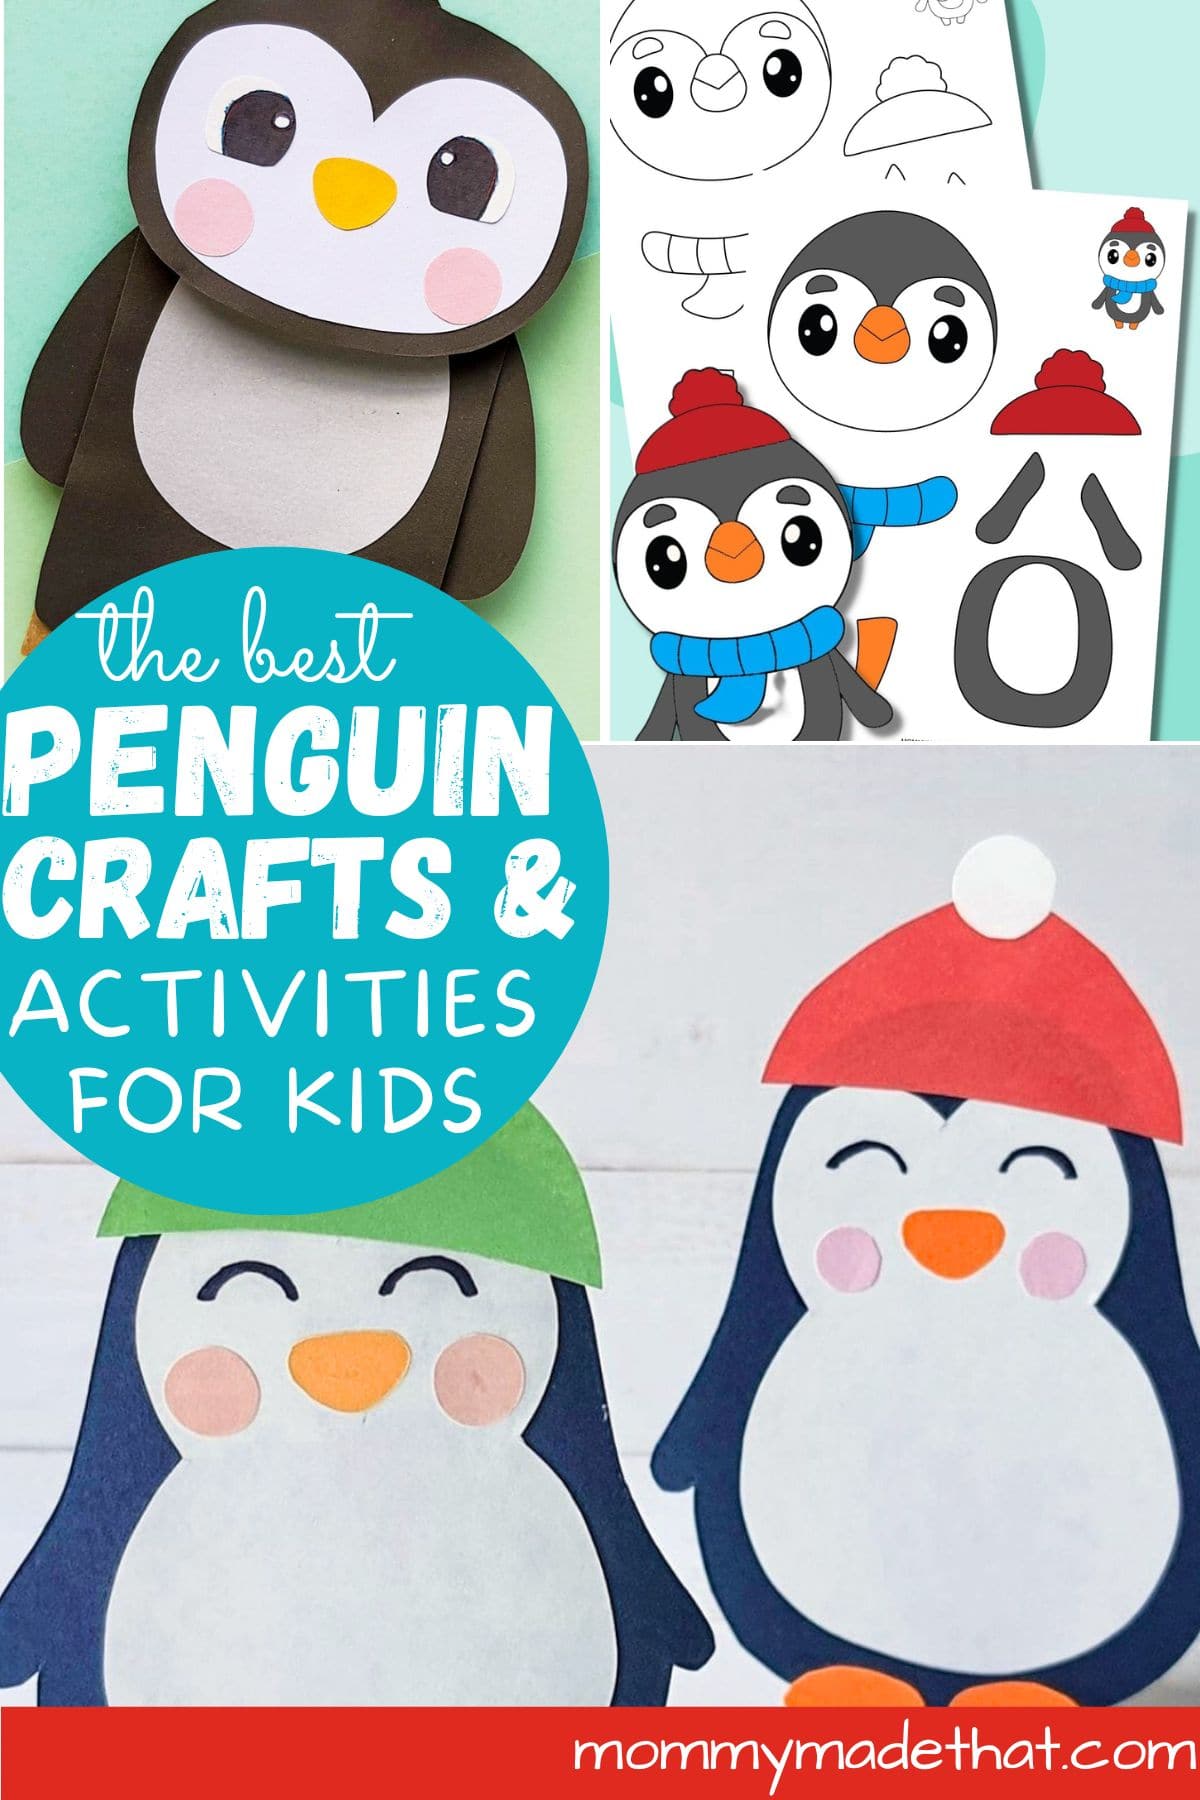 Penguin crafts and activities.